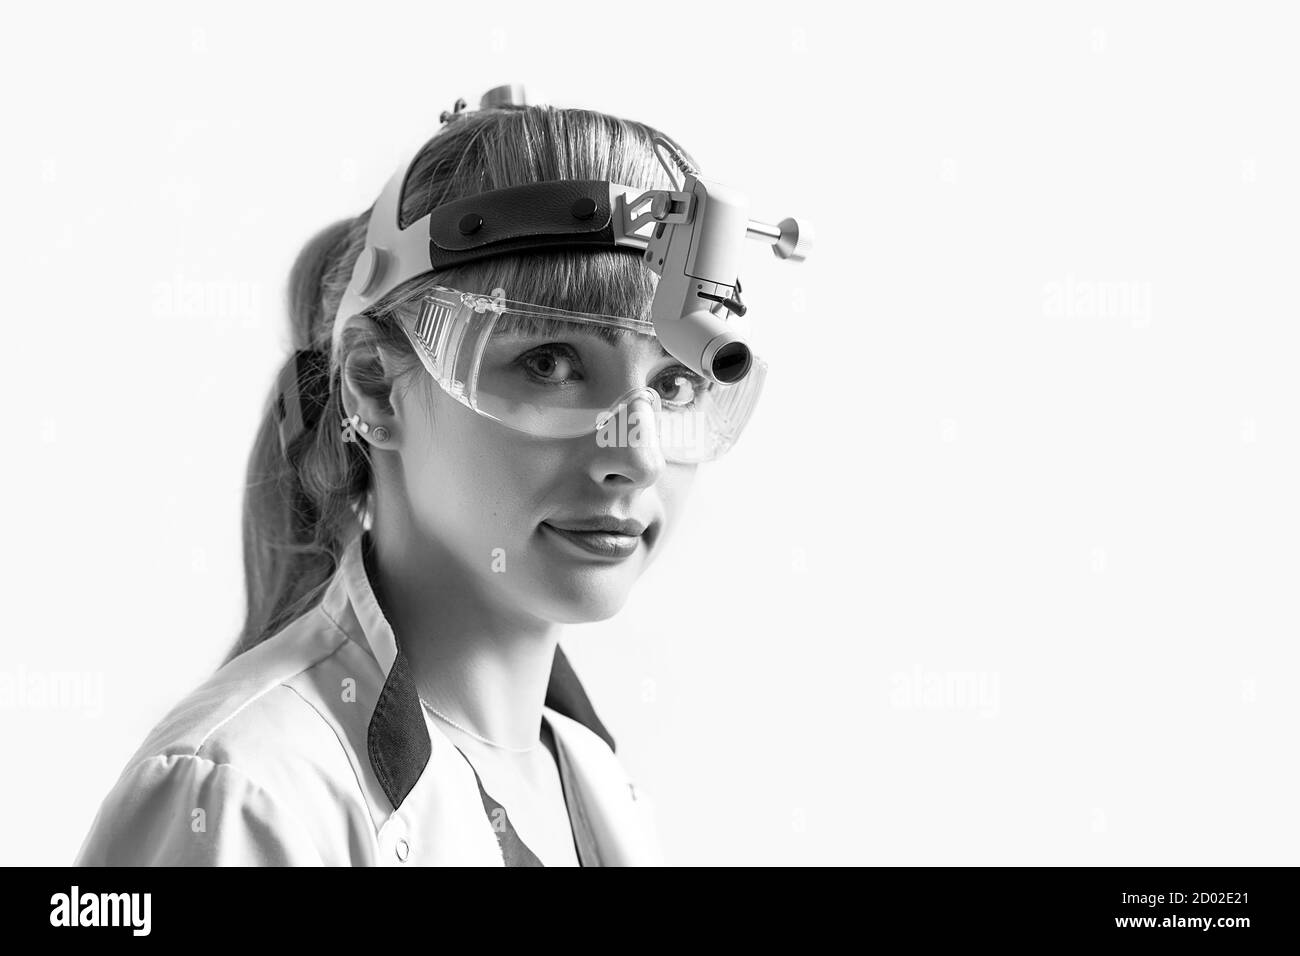 Confident ENT doctor wearing surgical headlight head light and protective glasses. Closeup portrait of female otolaryngologist or head and neck Stock Photo